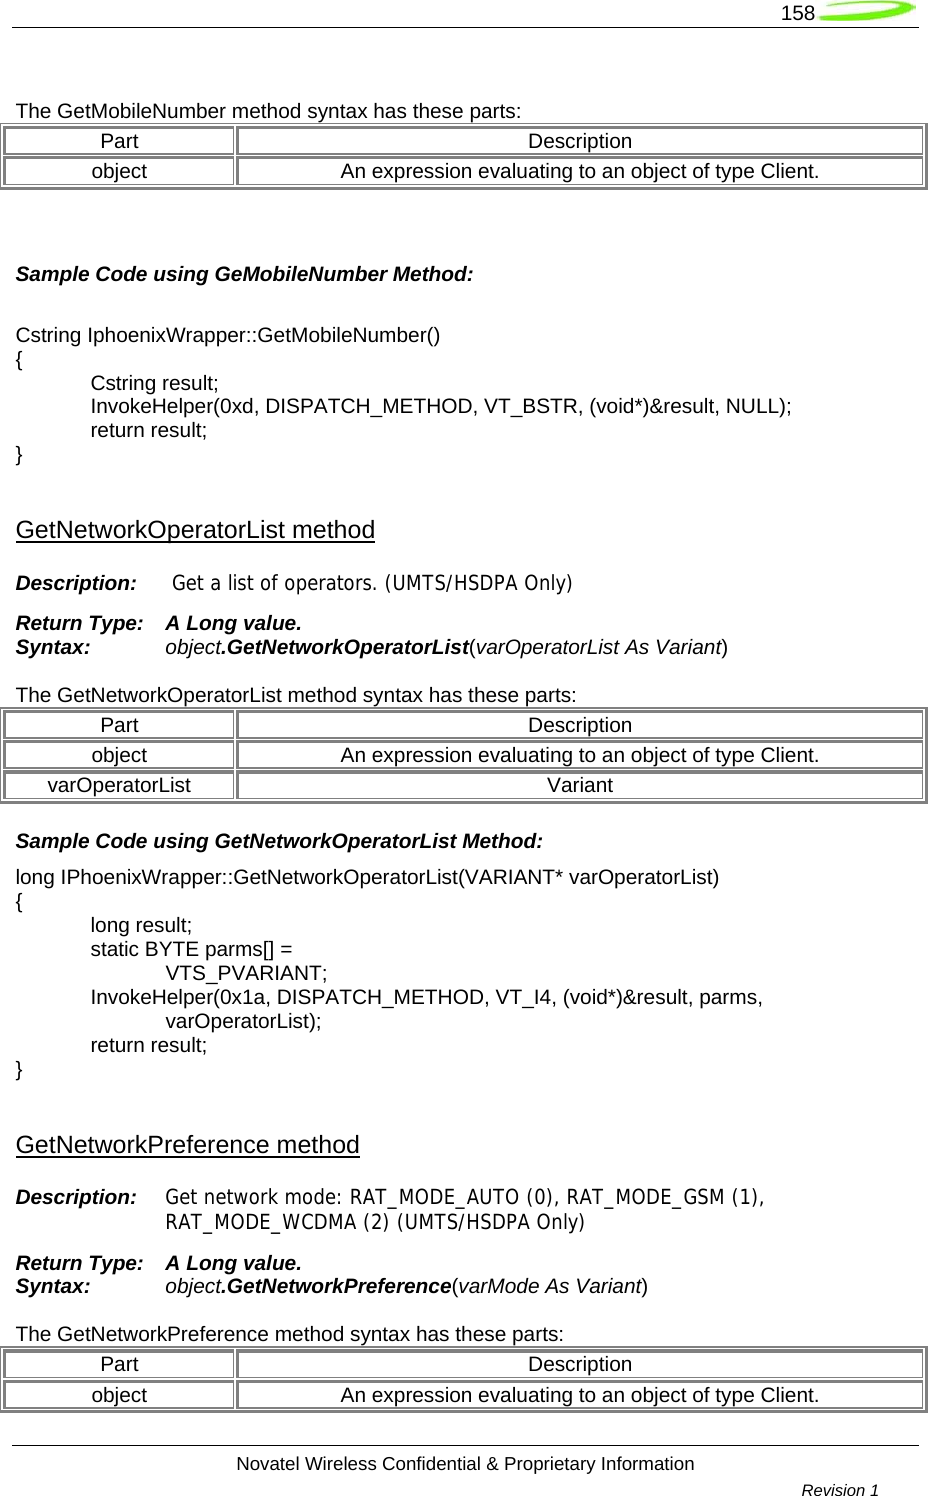   158  Novatel Wireless Confidential &amp; Proprietary Information        Revision 1    The GetMobileNumber method syntax has these parts: Part Description object  An expression evaluating to an object of type Client.   Sample Code using GeMobileNumber Method:  Cstring IphoenixWrapper::GetMobileNumber() {  Cstring result;  InvokeHelper(0xd, DISPATCH_METHOD, VT_BSTR, (void*)&amp;result, NULL);  return result; }  GetNetworkOperatorList method Description:   Get a list of operators. (UMTS/HSDPA Only) Return Type:  A Long value. Syntax:  object.GetNetworkOperatorList(varOperatorList As Variant)  The GetNetworkOperatorList method syntax has these parts: Part Description object  An expression evaluating to an object of type Client. varOperatorList Variant Sample Code using GetNetworkOperatorList Method: long IPhoenixWrapper::GetNetworkOperatorList(VARIANT* varOperatorList) {  long result;   static BYTE parms[] =   VTS_PVARIANT;  InvokeHelper(0x1a, DISPATCH_METHOD, VT_I4, (void*)&amp;result, parms,   varOperatorList);  return result; }  GetNetworkPreference method Description:  Get network mode: RAT_MODE_AUTO (0), RAT_MODE_GSM (1), RAT_MODE_WCDMA (2) (UMTS/HSDPA Only) Return Type:  A Long value. Syntax:  object.GetNetworkPreference(varMode As Variant)  The GetNetworkPreference method syntax has these parts: Part Description object  An expression evaluating to an object of type Client. 